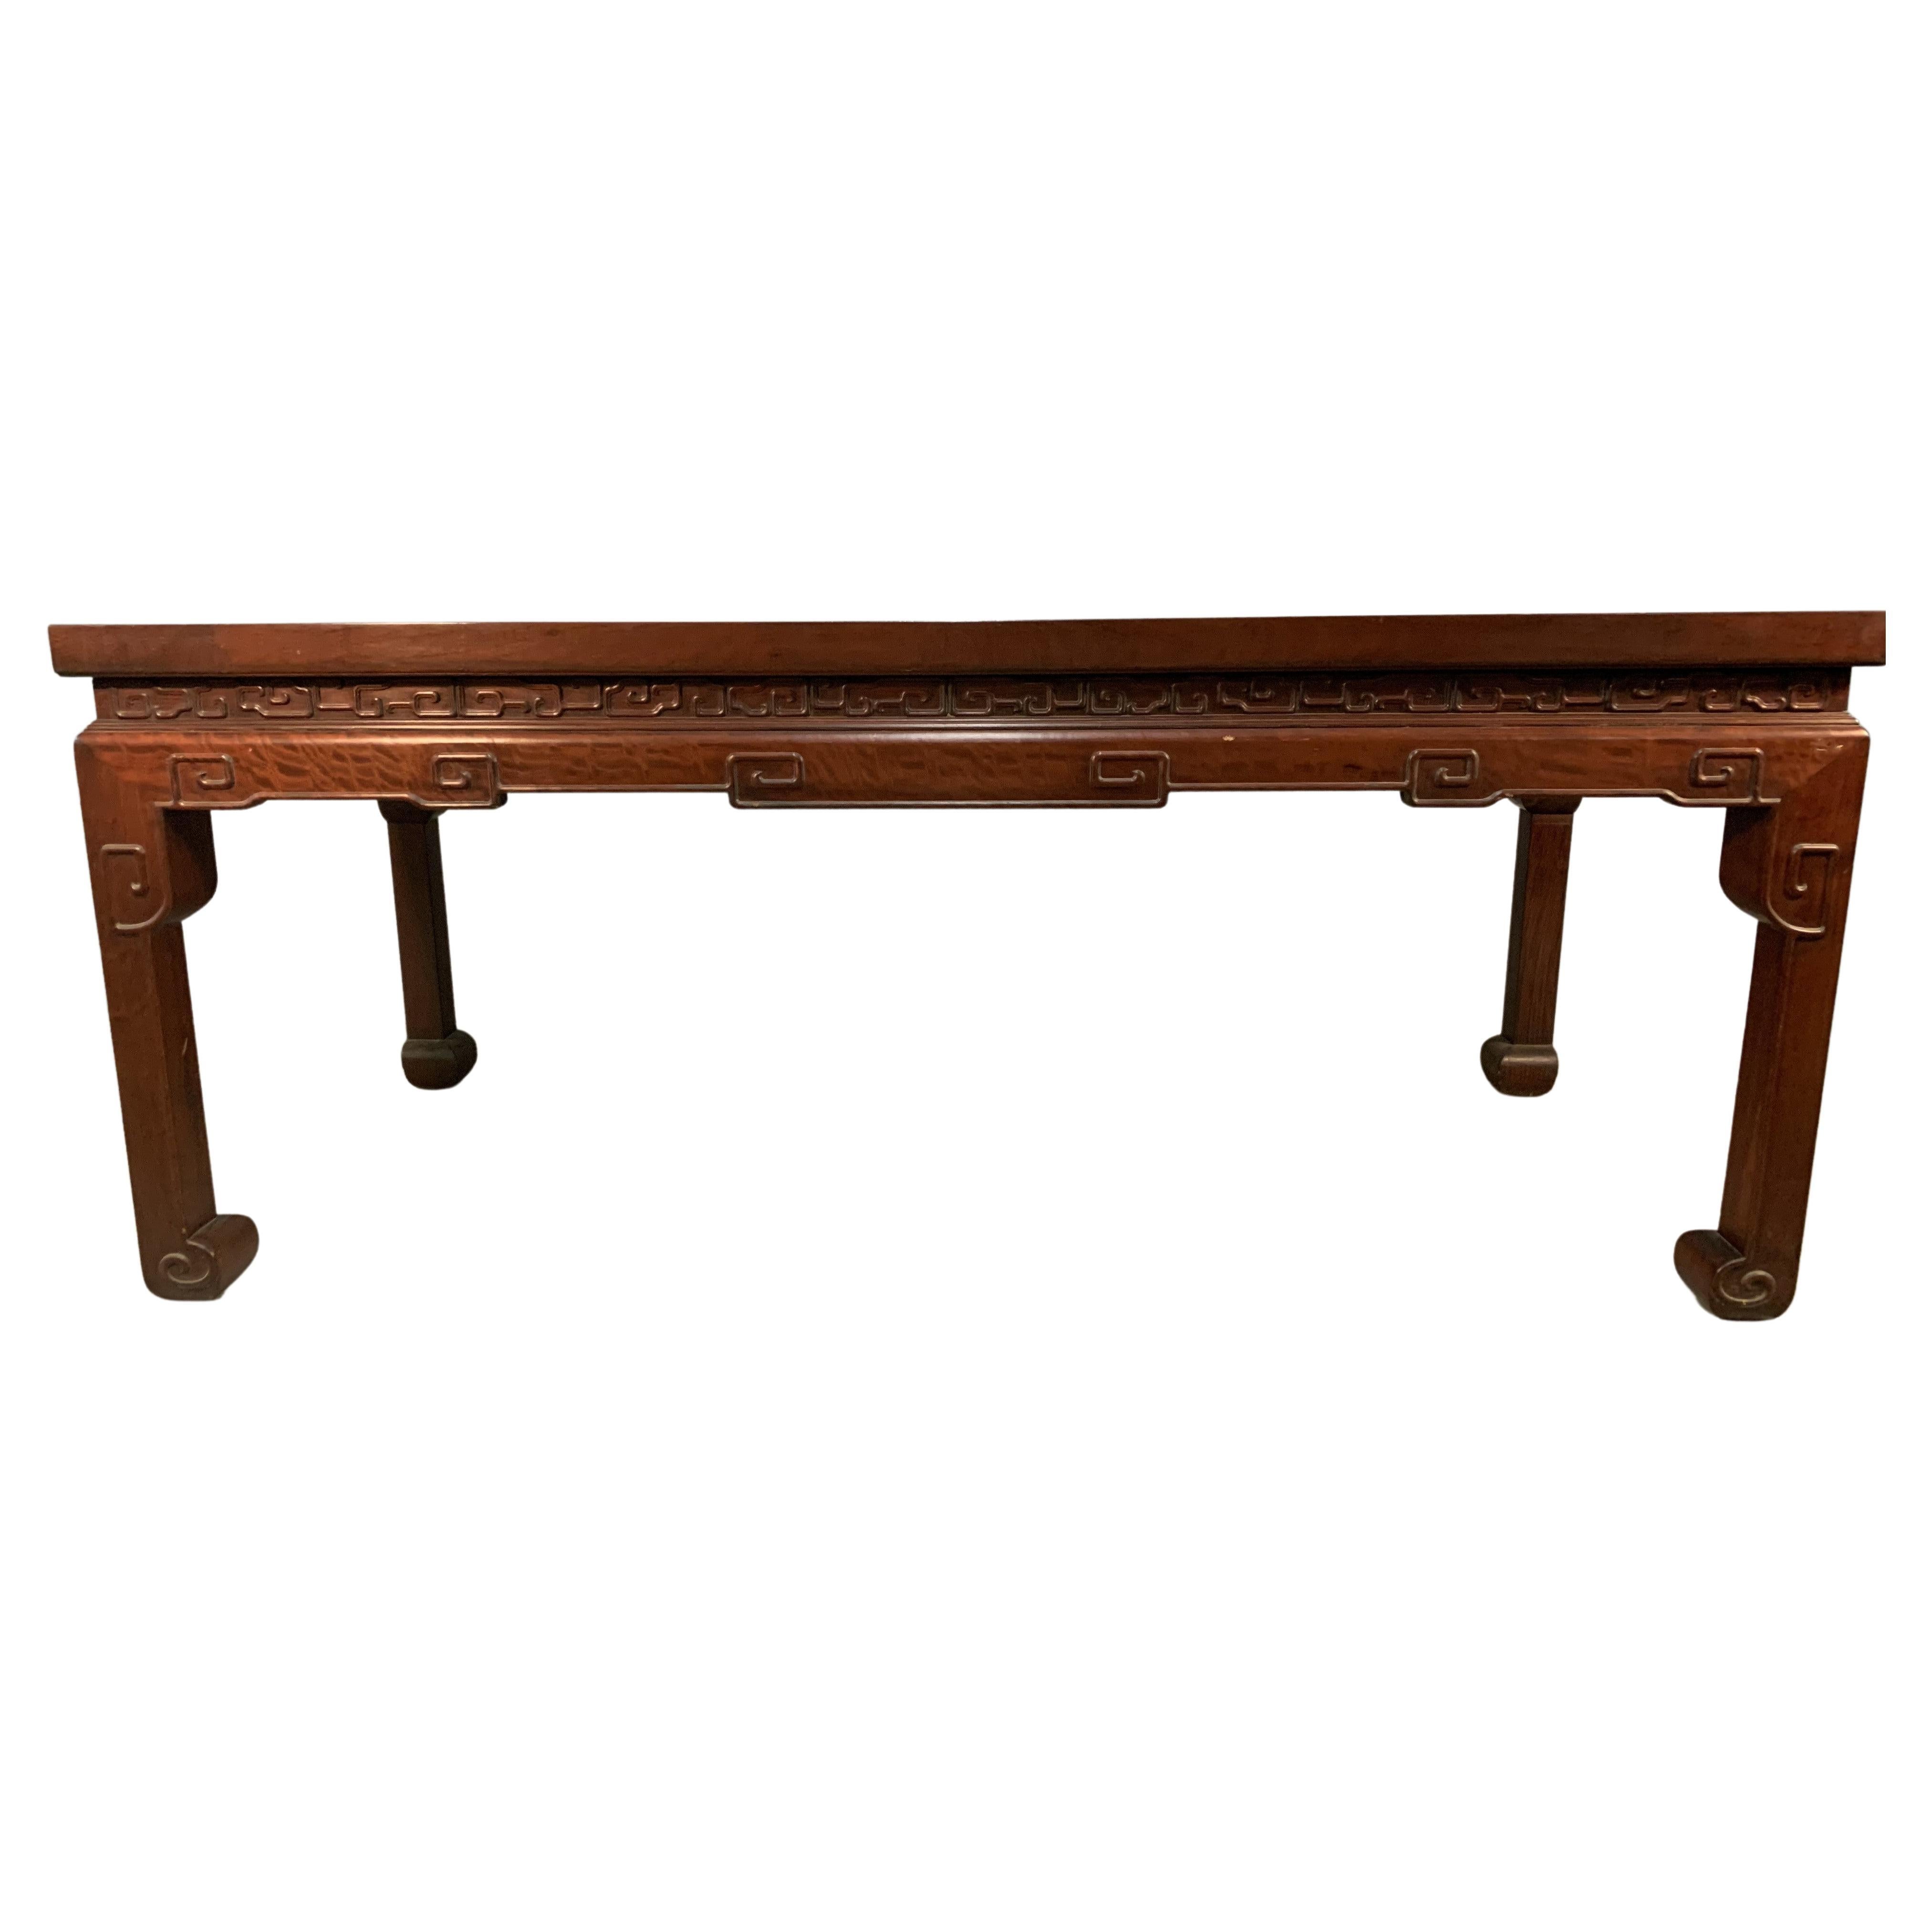 An exceptional carved rosewood center table in the Ming style in large old timber from the mid 20th century. This piece is very high quality and style. 
It would easily work with European antiques as well as in a contemporary setting. 
This table